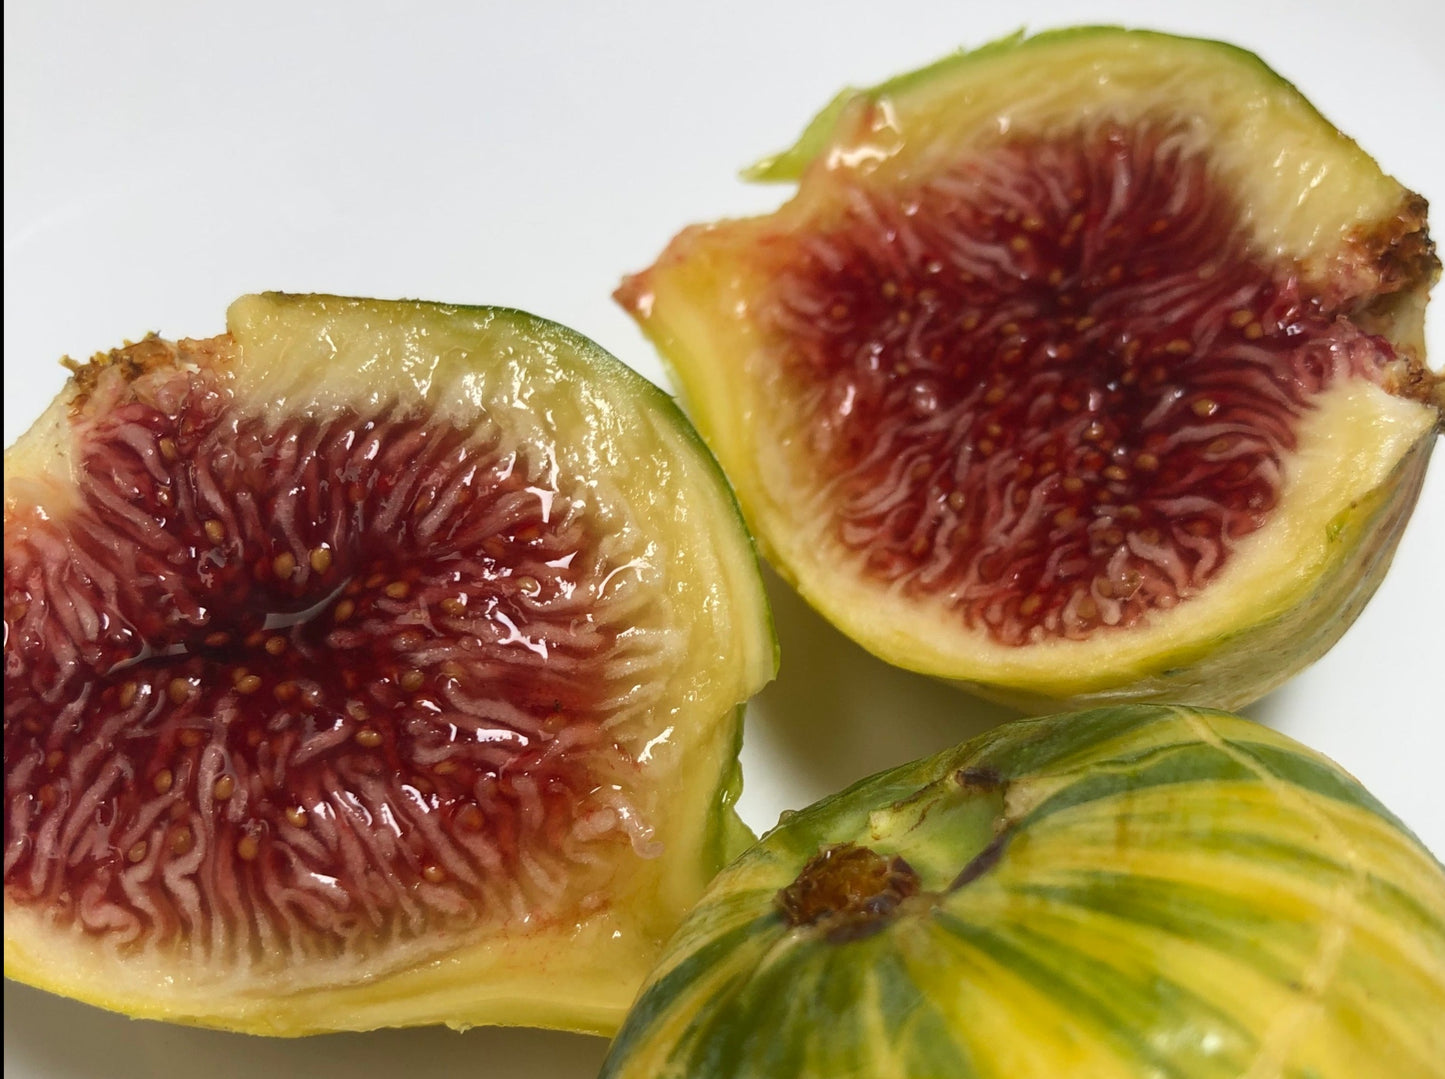 Panache Fig aka Tiger Stripe Fig Tree - 2-Cuttings - Delicious Variegated Figs